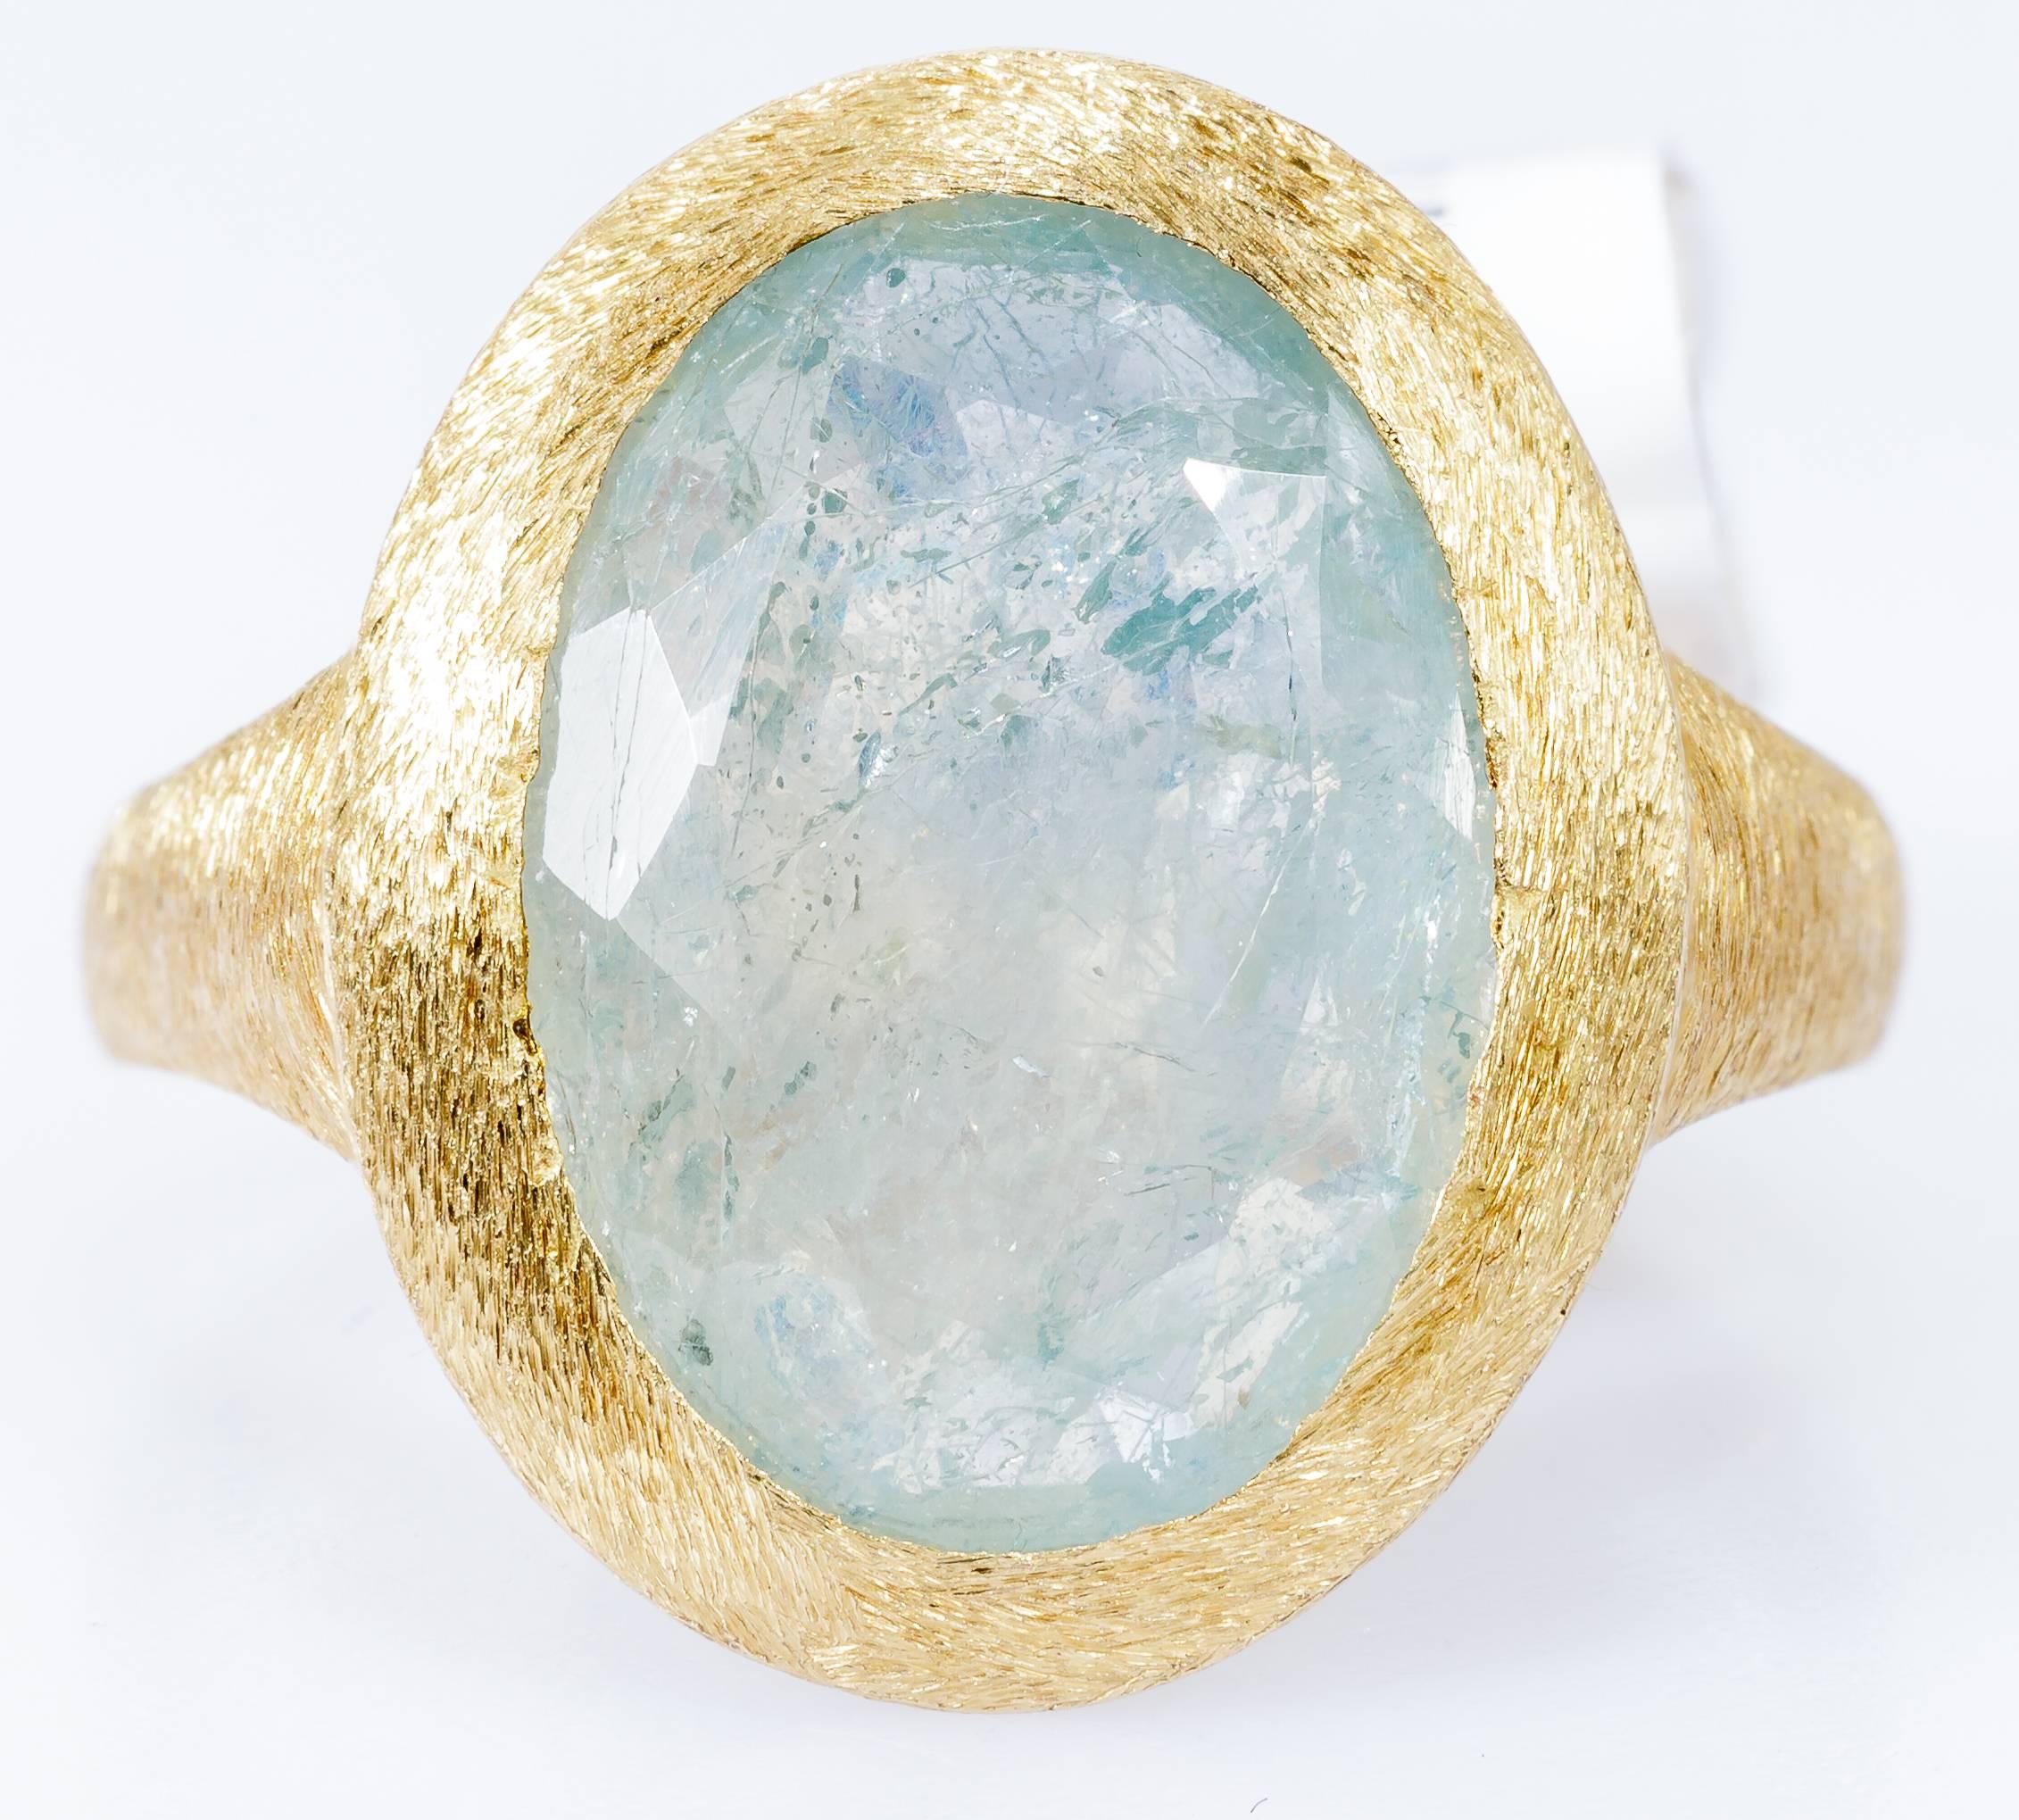 This Yvel ring features a natural blue-green sapphire set in 18k yellow gold with a satin finish. The ring is size 7. 

The stone measures 13.5mm x 10mm. The carat weight is 7.50 ct. The top of the ring including bezel setting is 17mm x 14mm. 